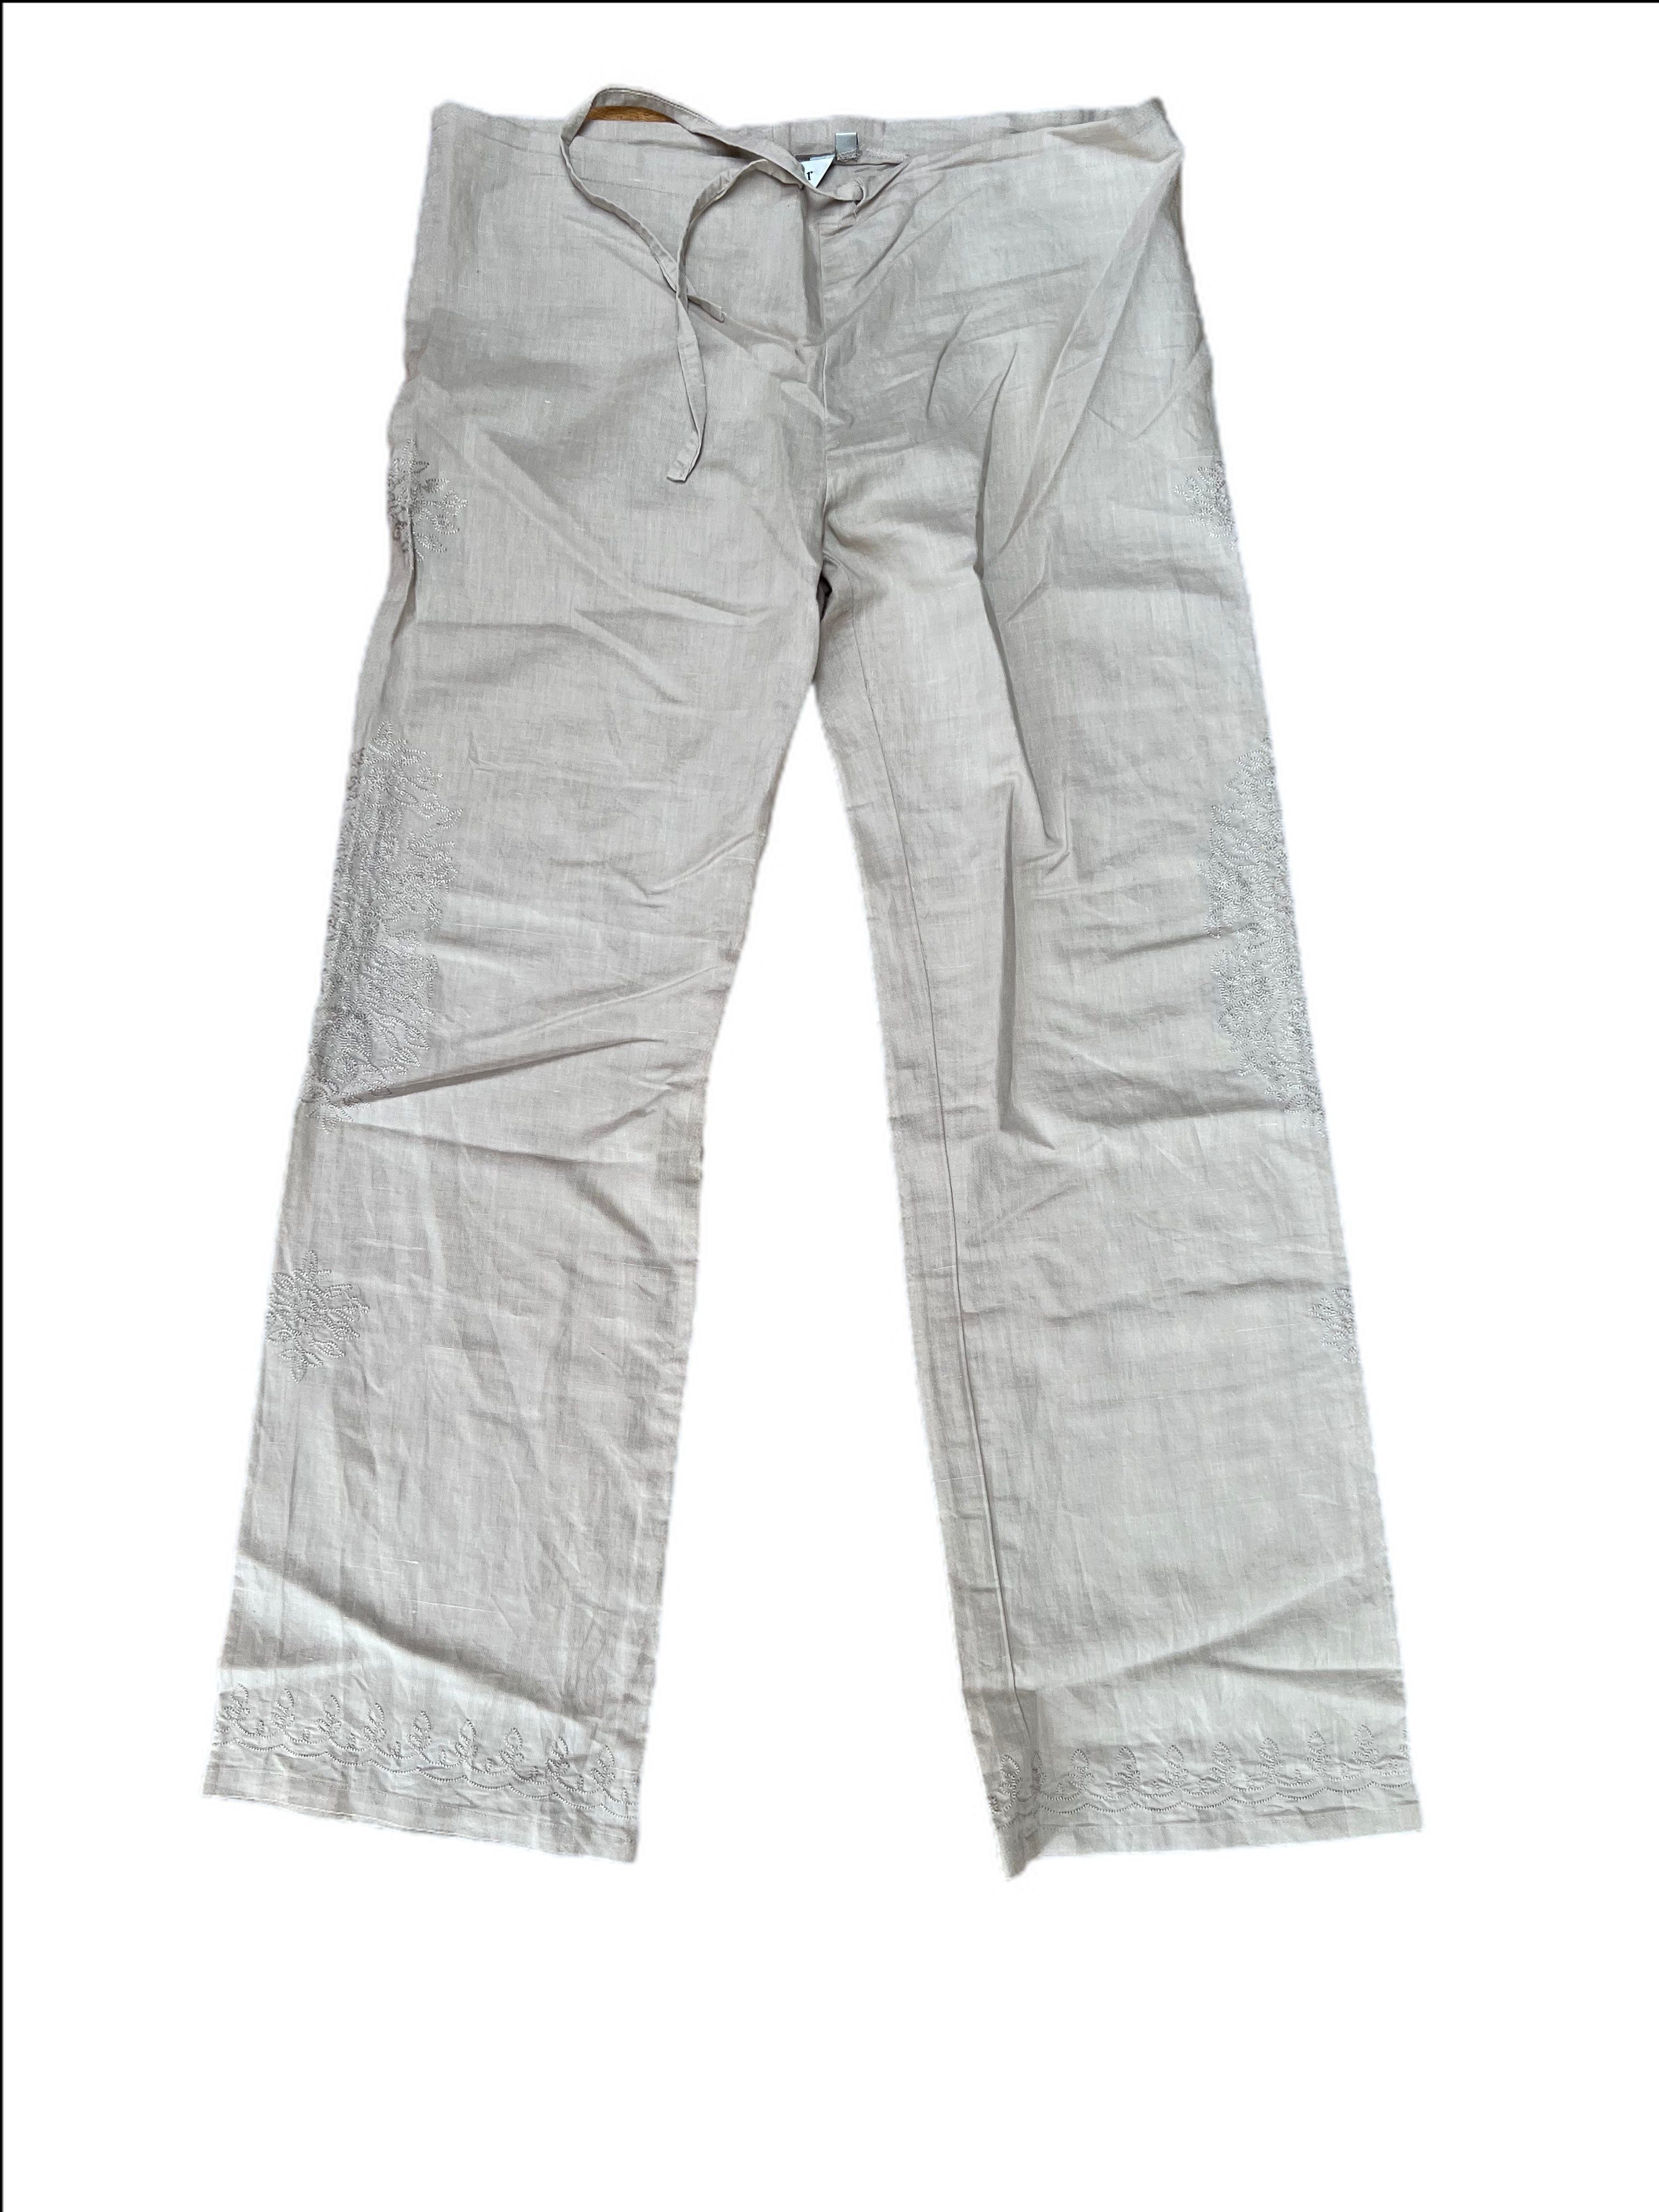 Drawstrin pants with embroidery details